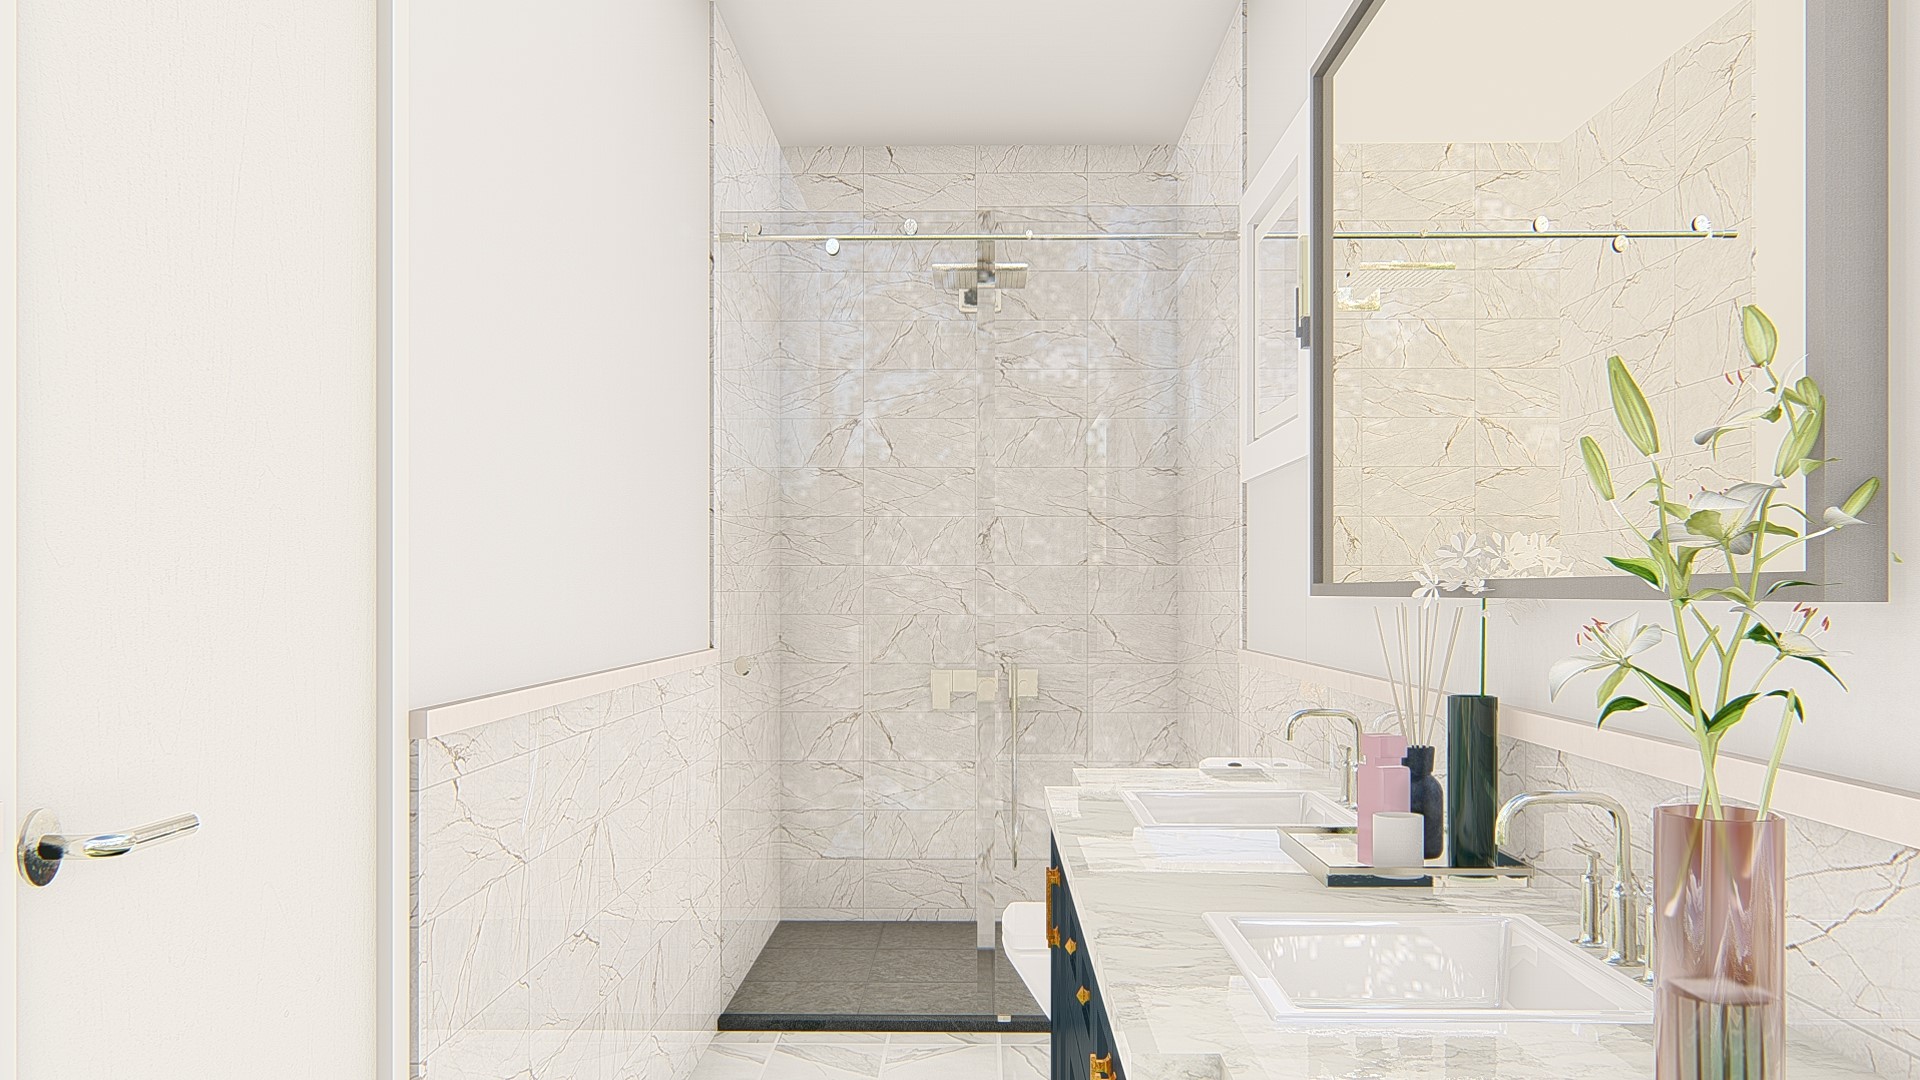 PRIMARY BATH.  This image is a close rendering of the final product